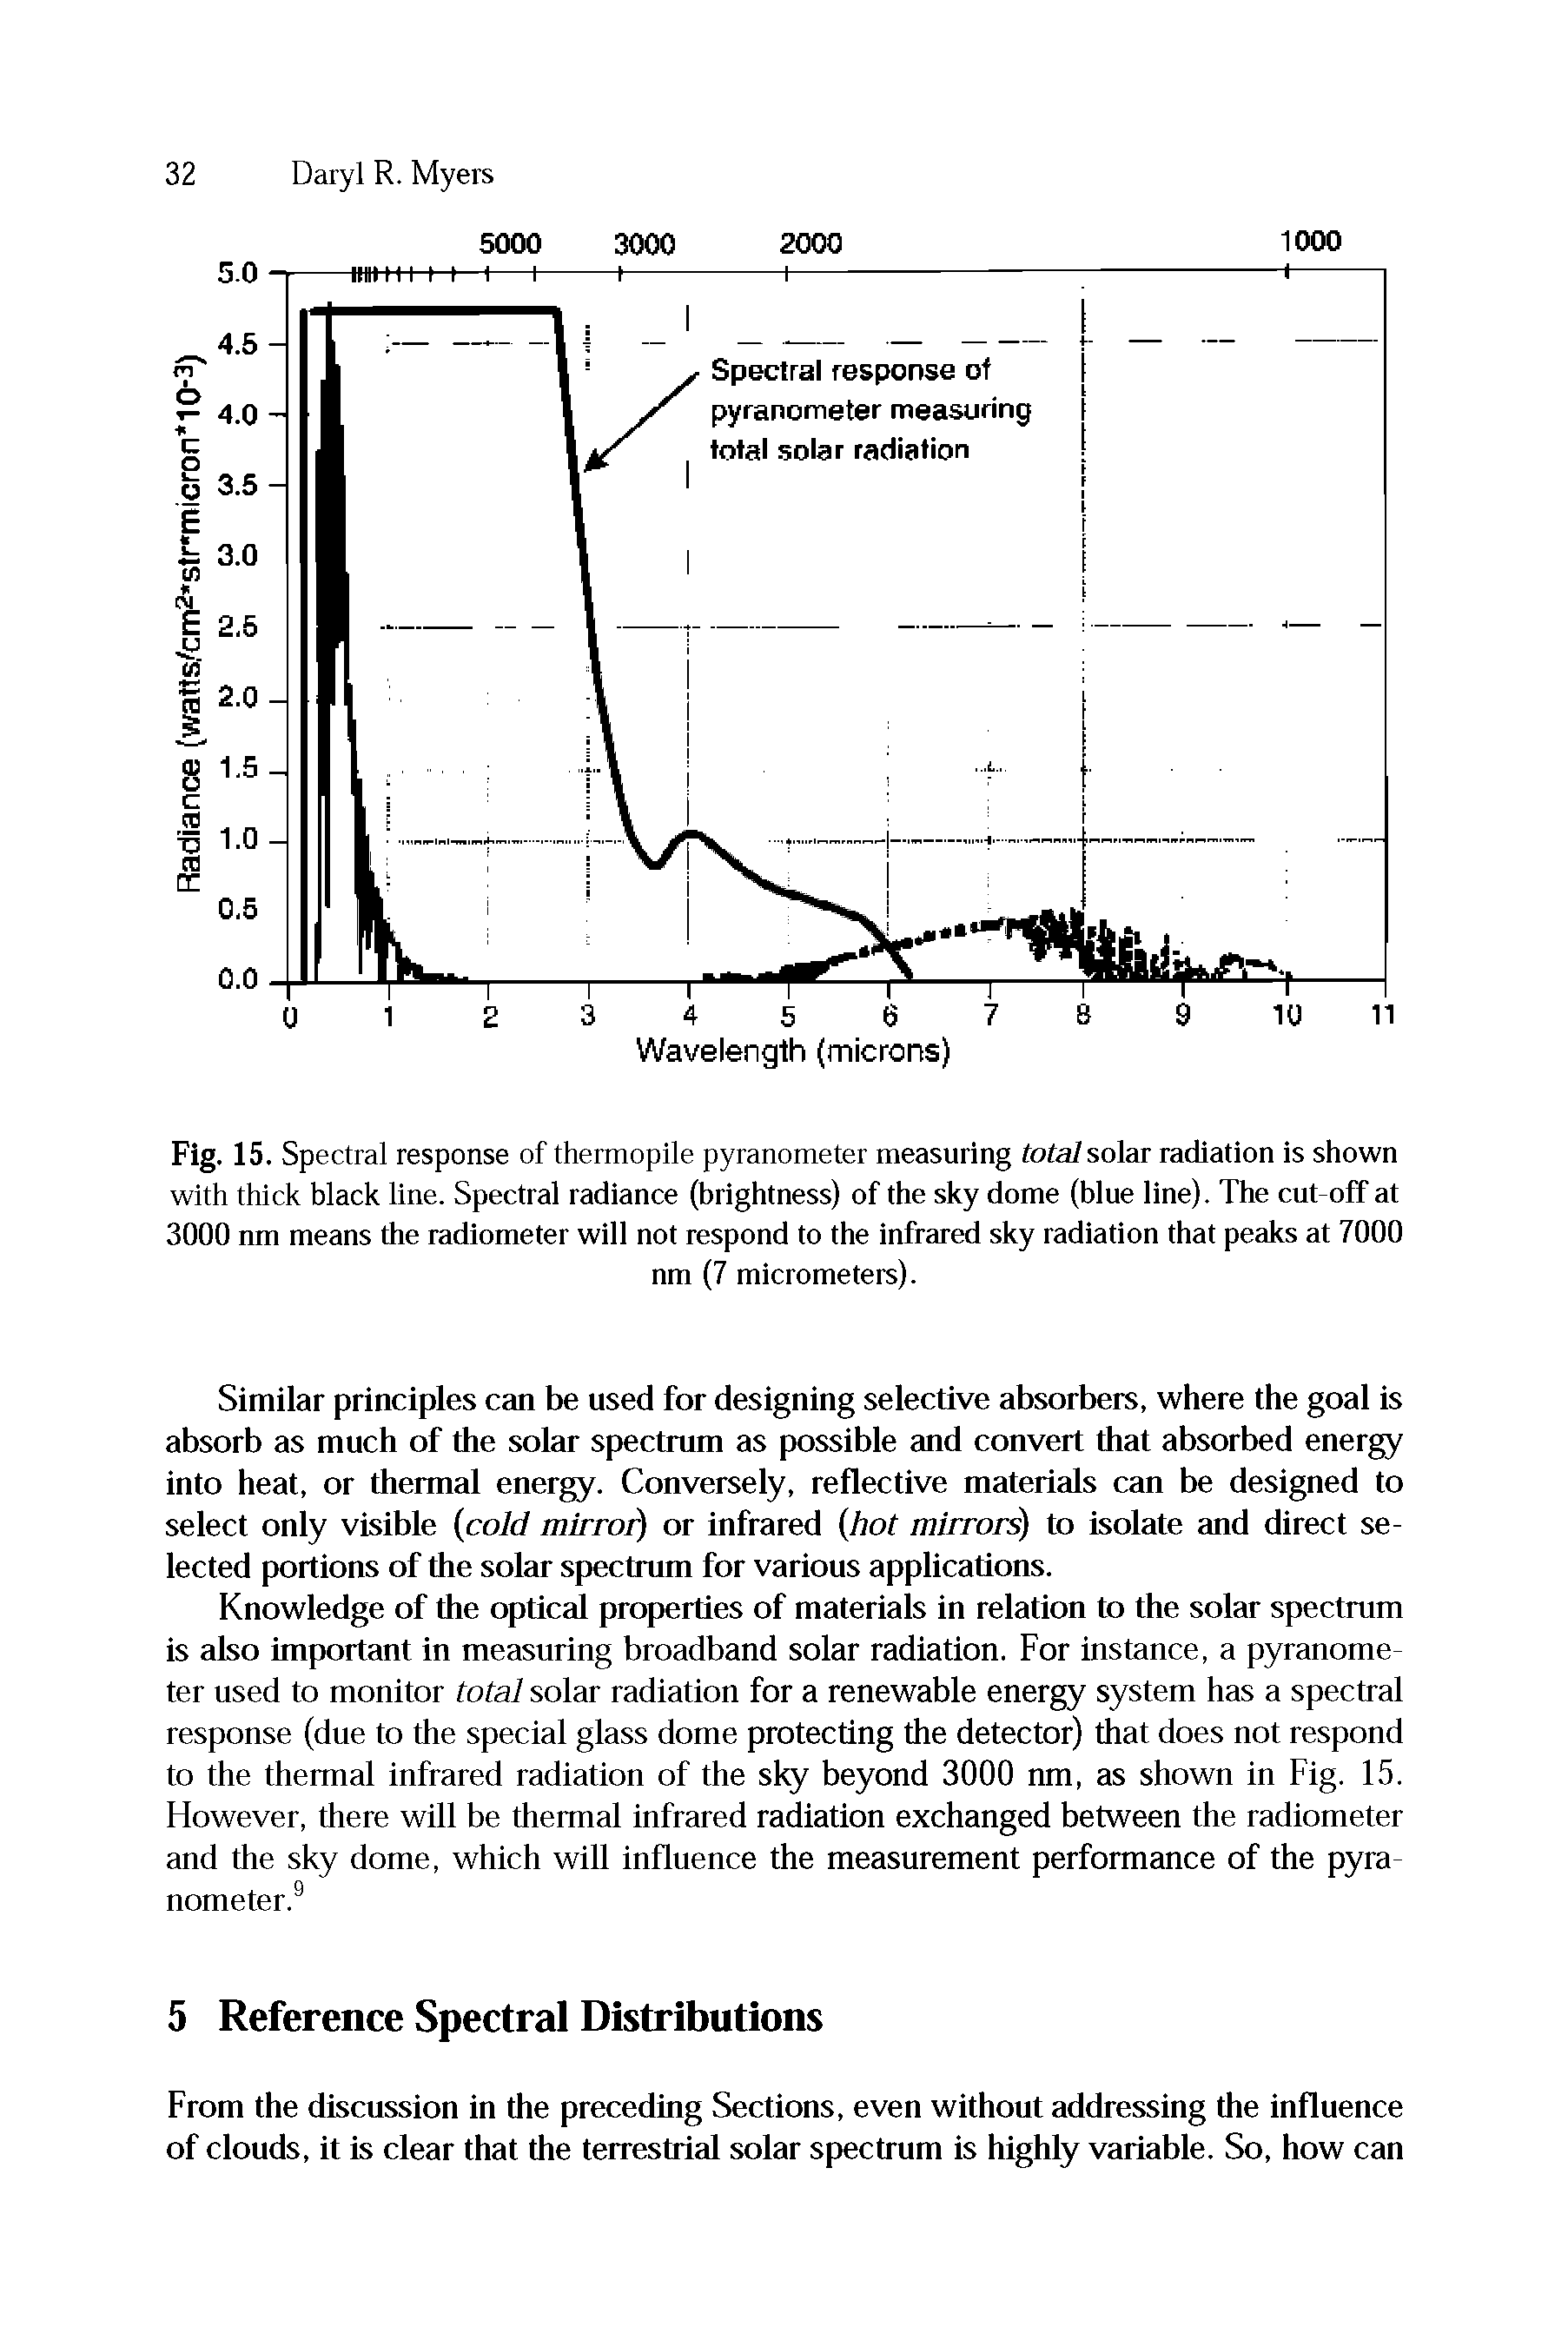 Fig. 15. Spectral response of thermopile pyranometer measuring total solar radiation is shown with thick black line. Spectral radiance (brightness) of the sky dome (blue line). The cut-off at 3000 nm means the radiometer will not respond to the infrared sky radiation that peaks at 7000...